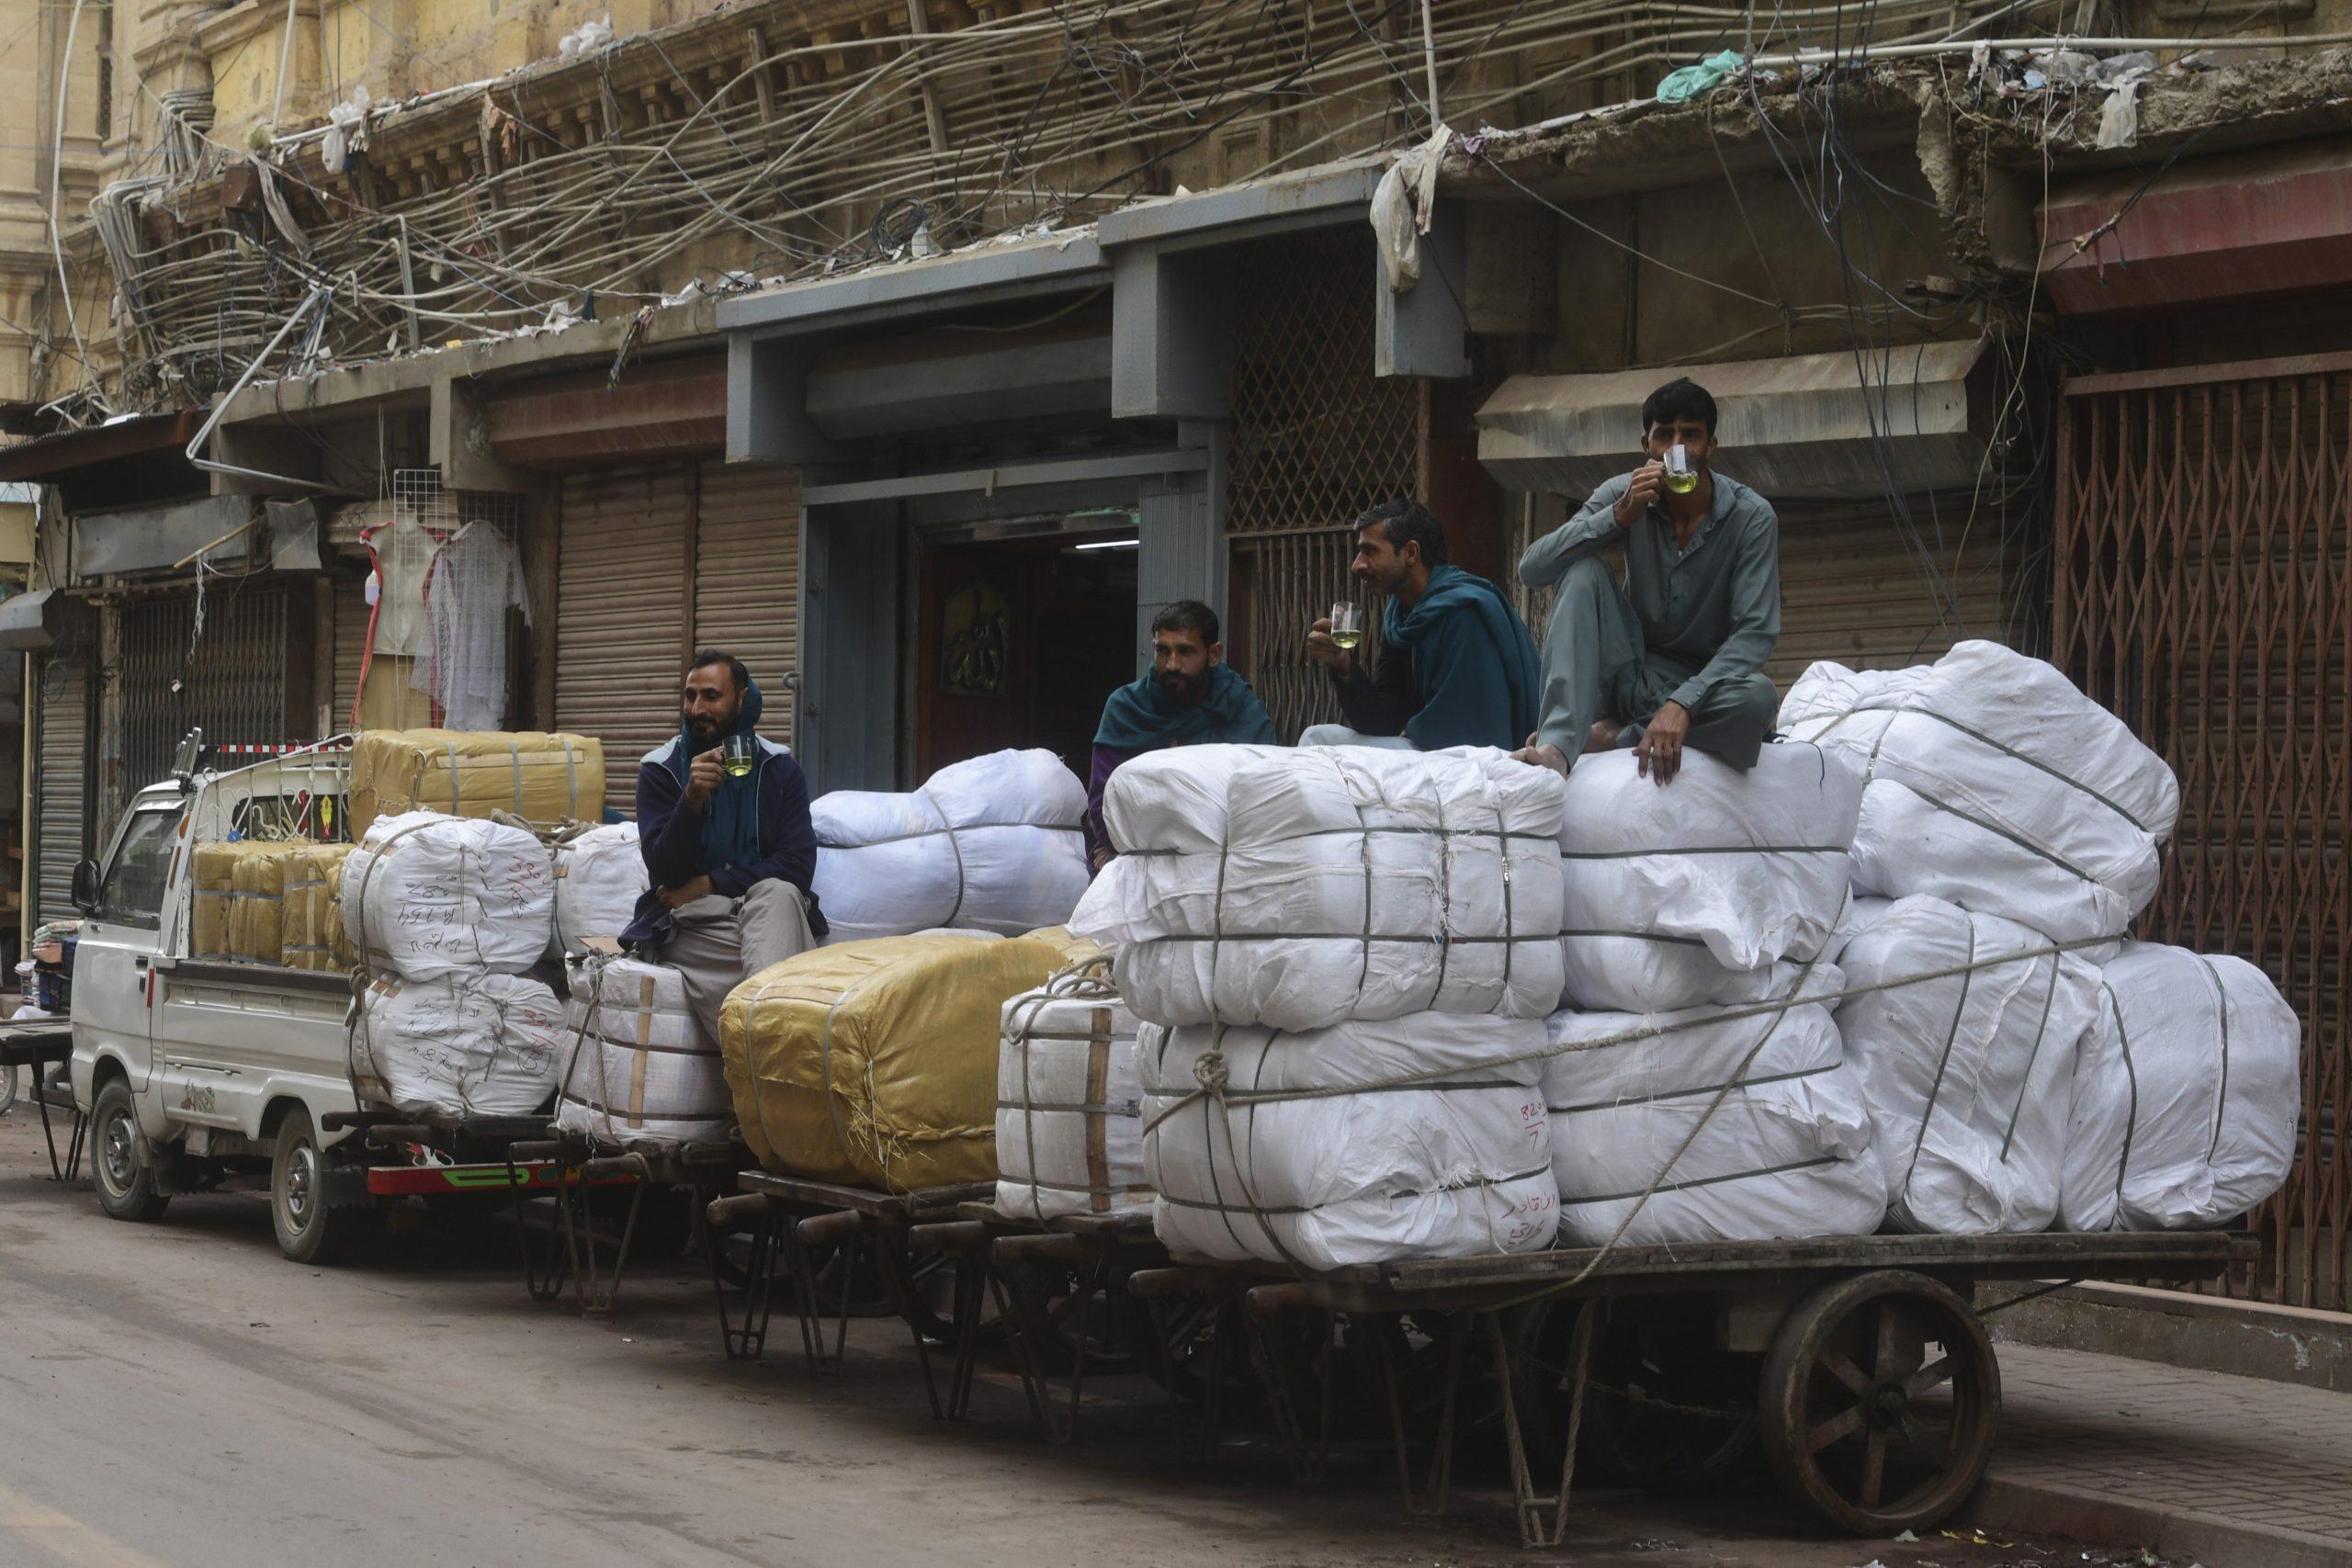 Labourers drink tea over their loaded carts at a market area in Karachi on Jan 6. Photo: AFP